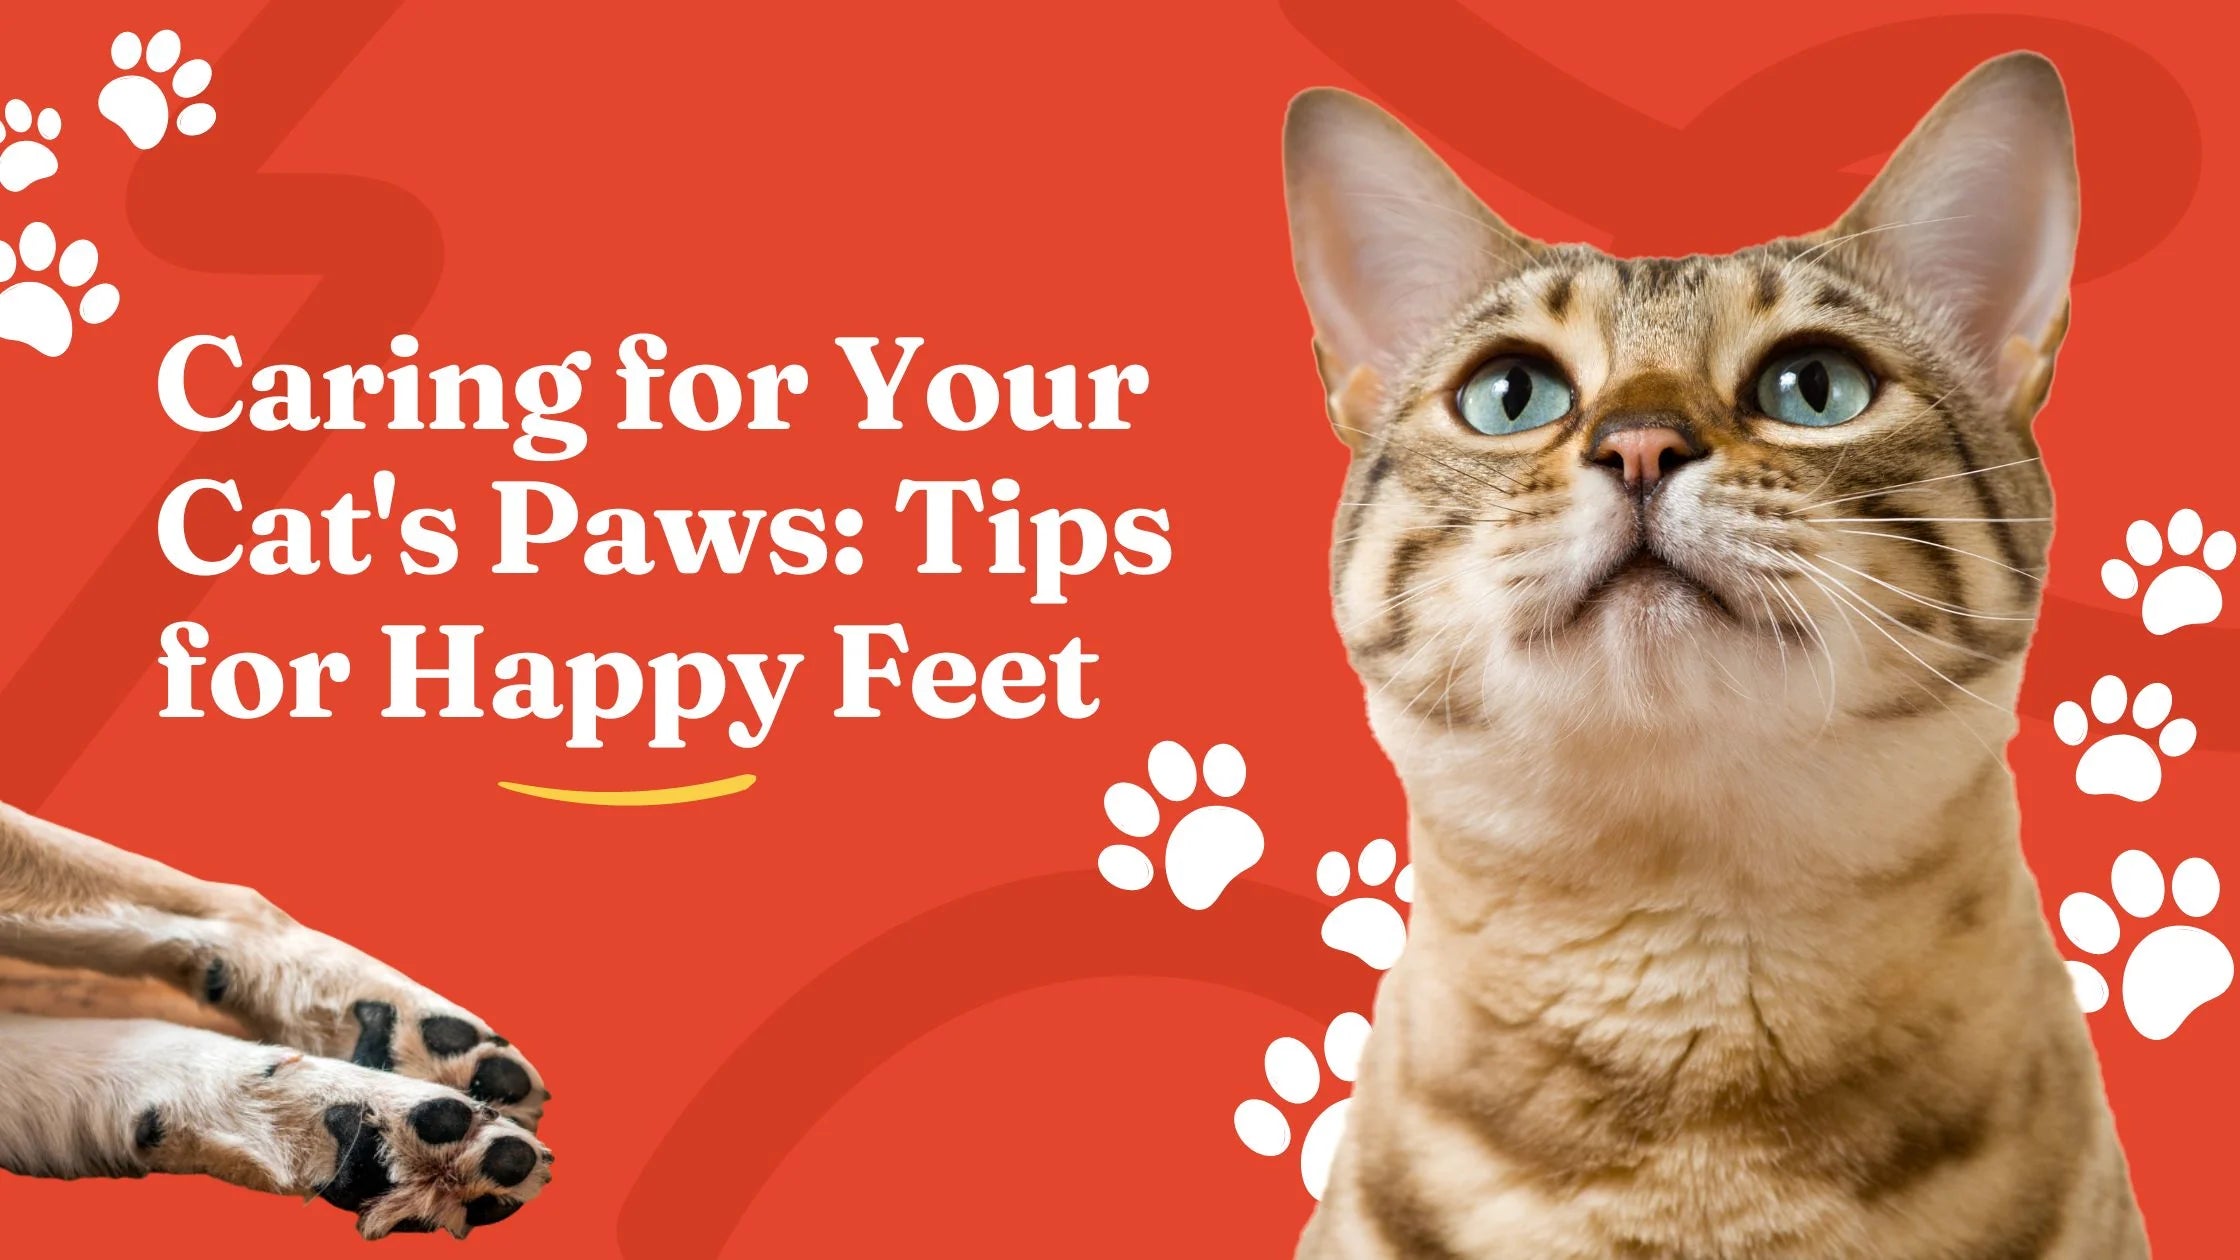 Caring for Your Cat's Paws: Tips for Happy Feet